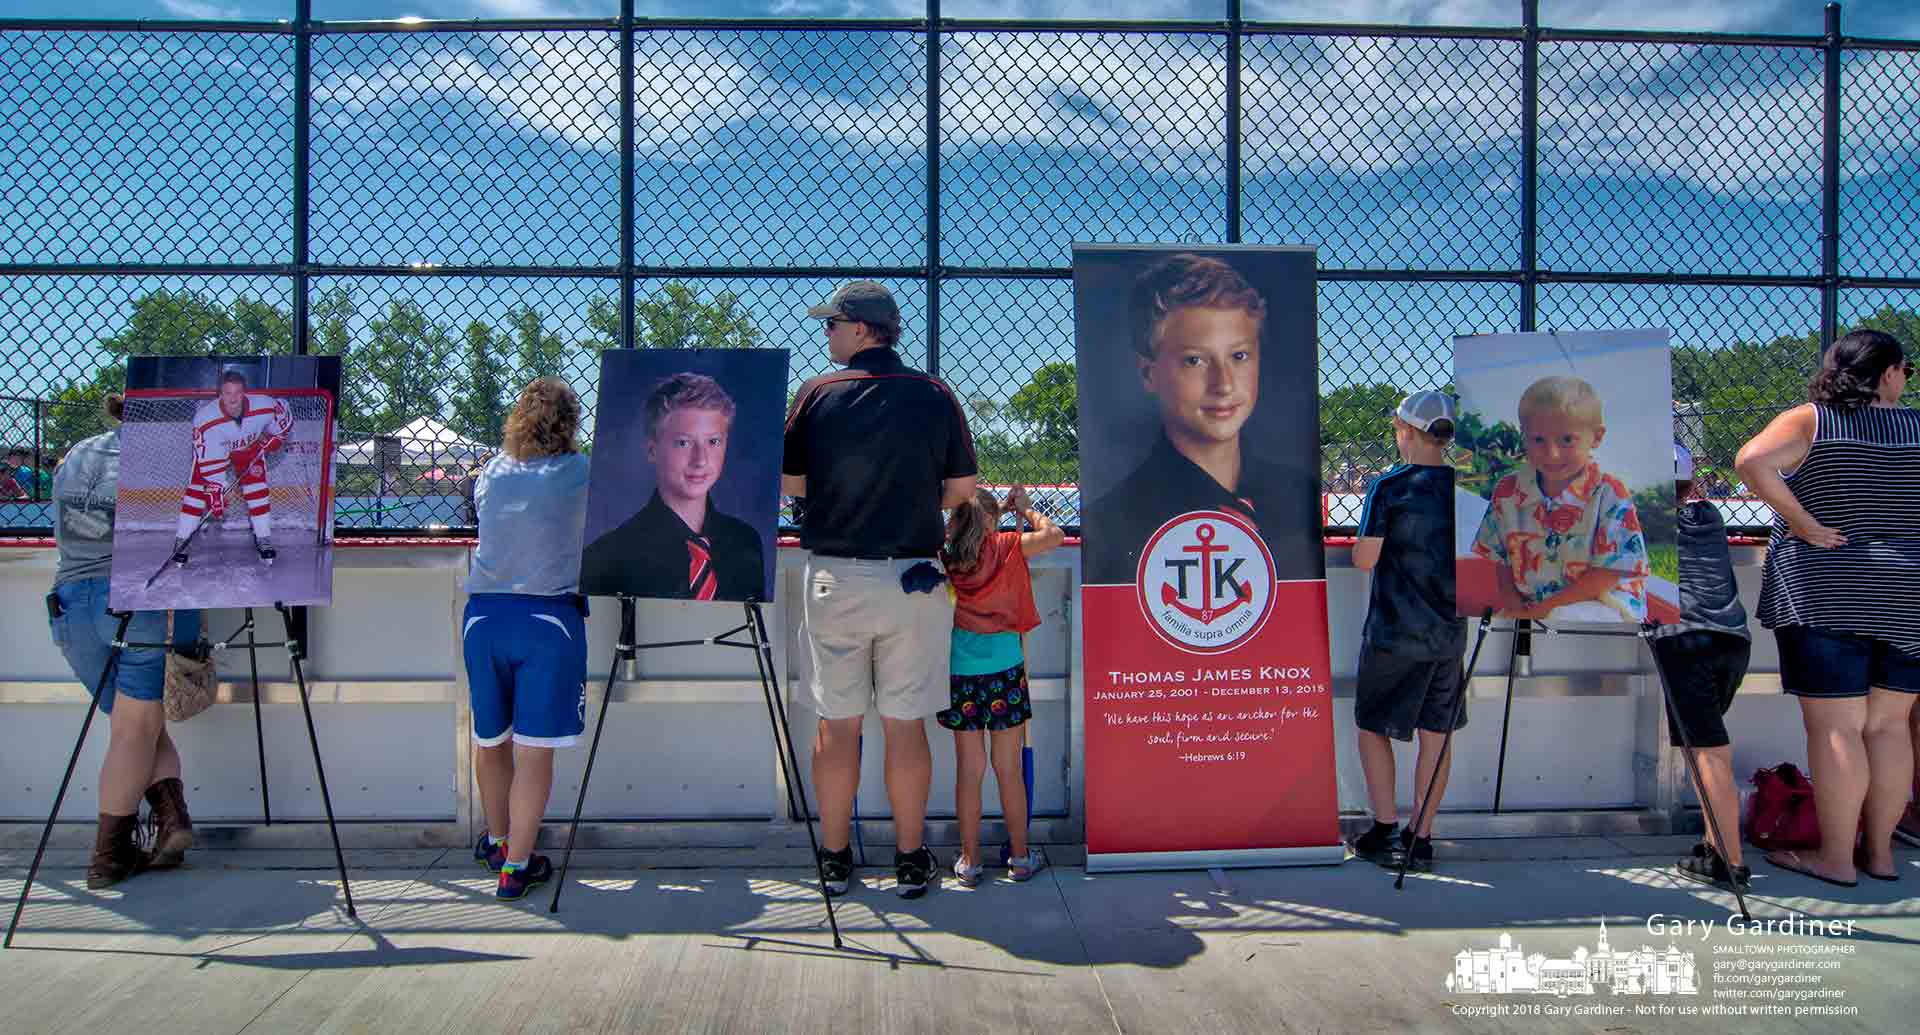 Photos of Thomas James Knox sit along the edge of the outdoor hockey rink dedicated in his name at ceremonies Saturday in Alum Creek Park South. My Final Photo for June 30, 2018.